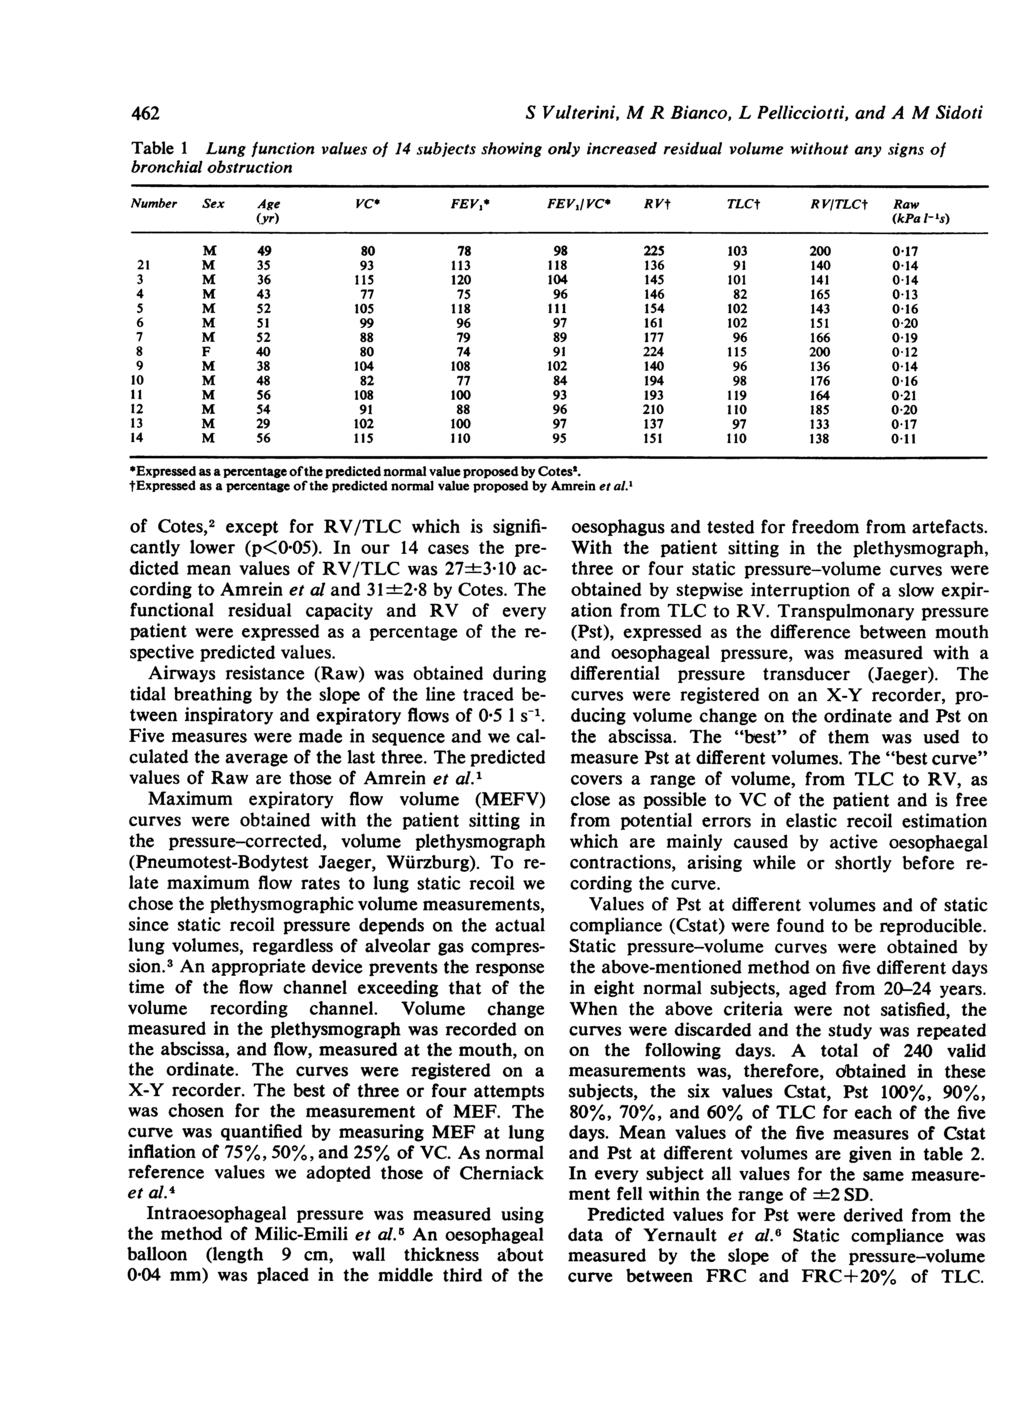 462 S Vulterini, M R Bianco, L Pellicciotti, and A M Sidoti Table 1 Lung function values of 14 subjects showing only increased residual volume without any signs of bronchial obstruction Number Sex